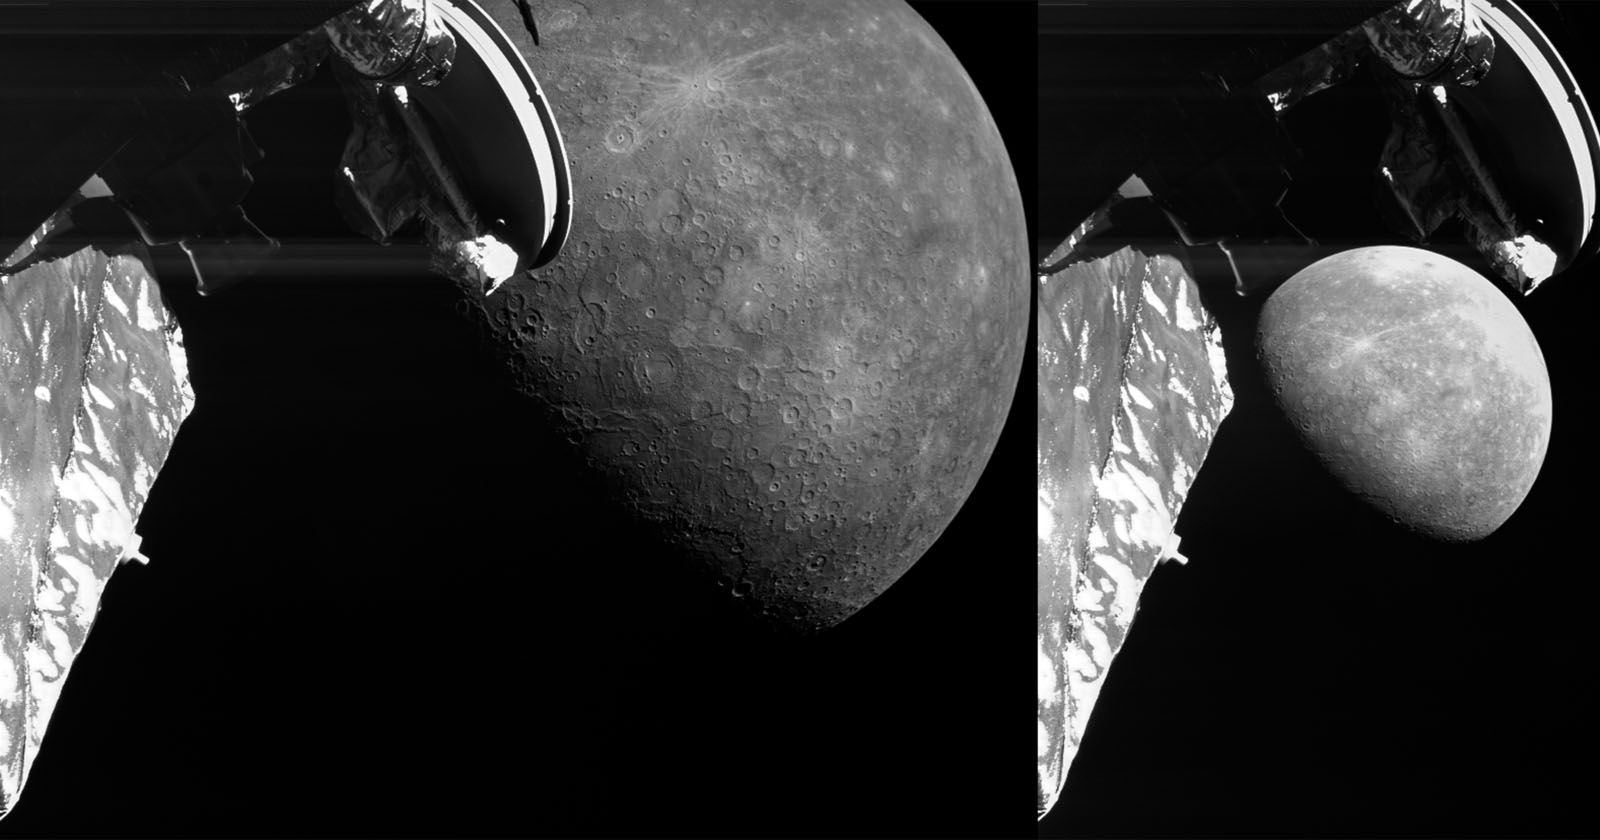 Close Flyby of Mercury Reveals New Craters and Volcanic Curiosities